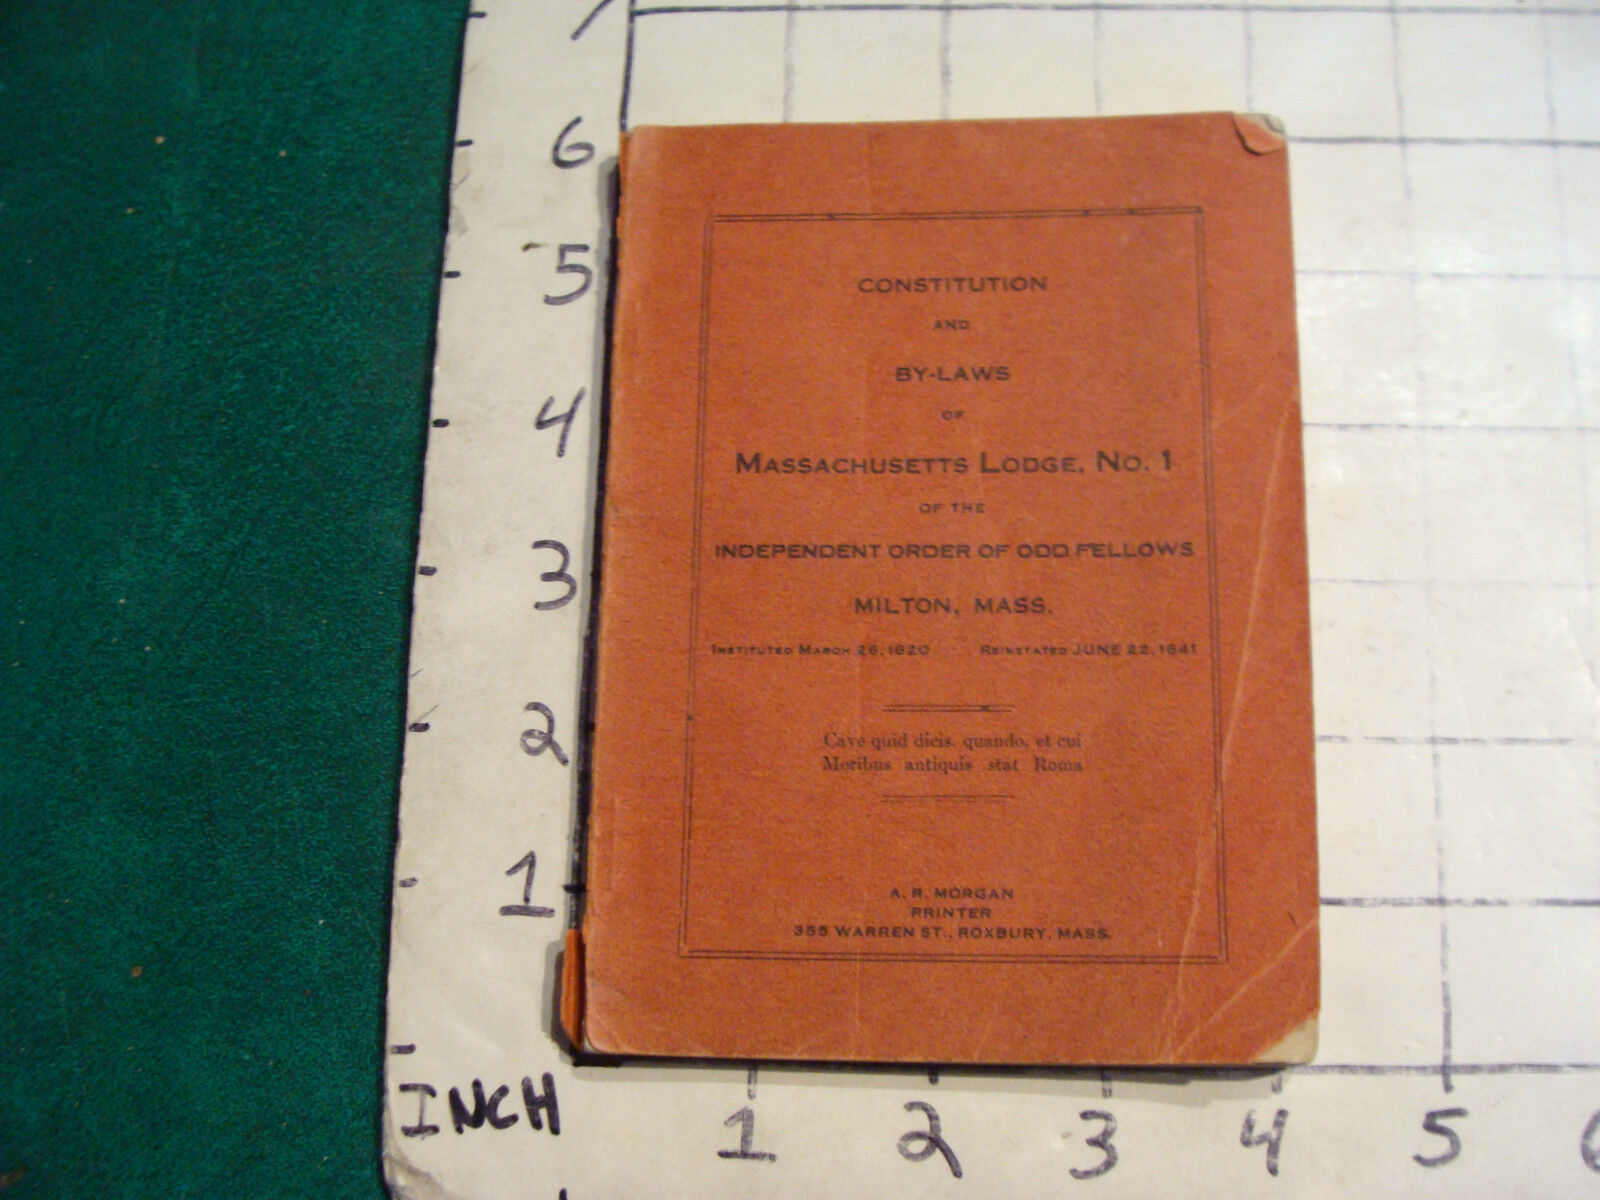 Constitution & by-laws of Mass. Lodge NO 1 ODD FELLOWS milton Mass, 1941